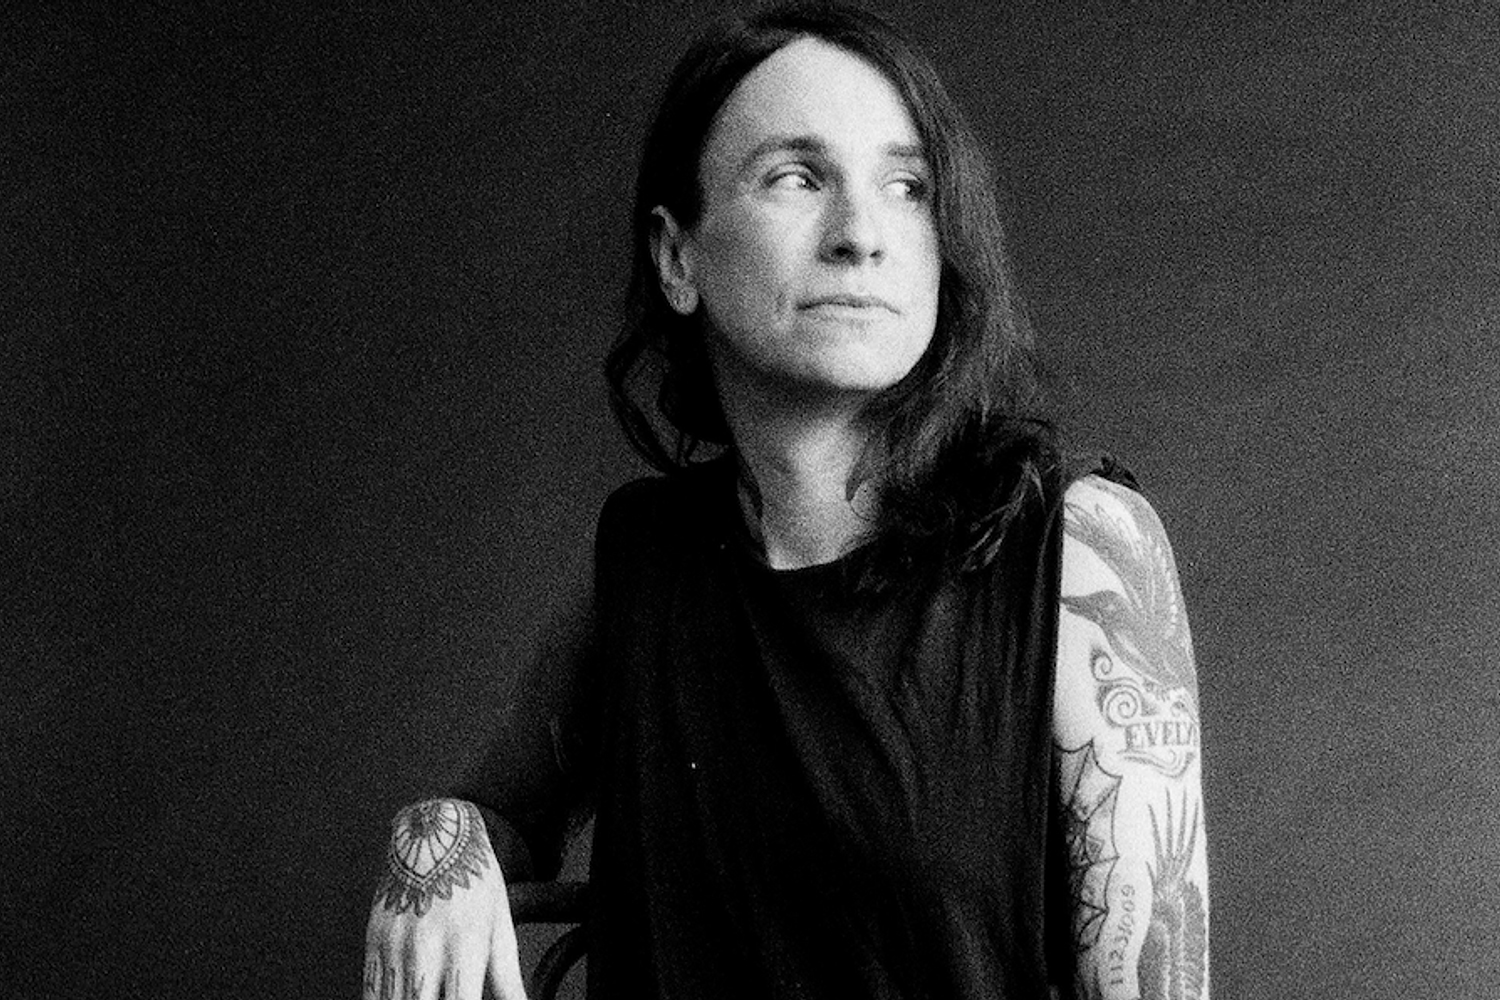 Laura Jane Grace: “What am I trying to say with this album? I’m saying STAY ALIVE!”